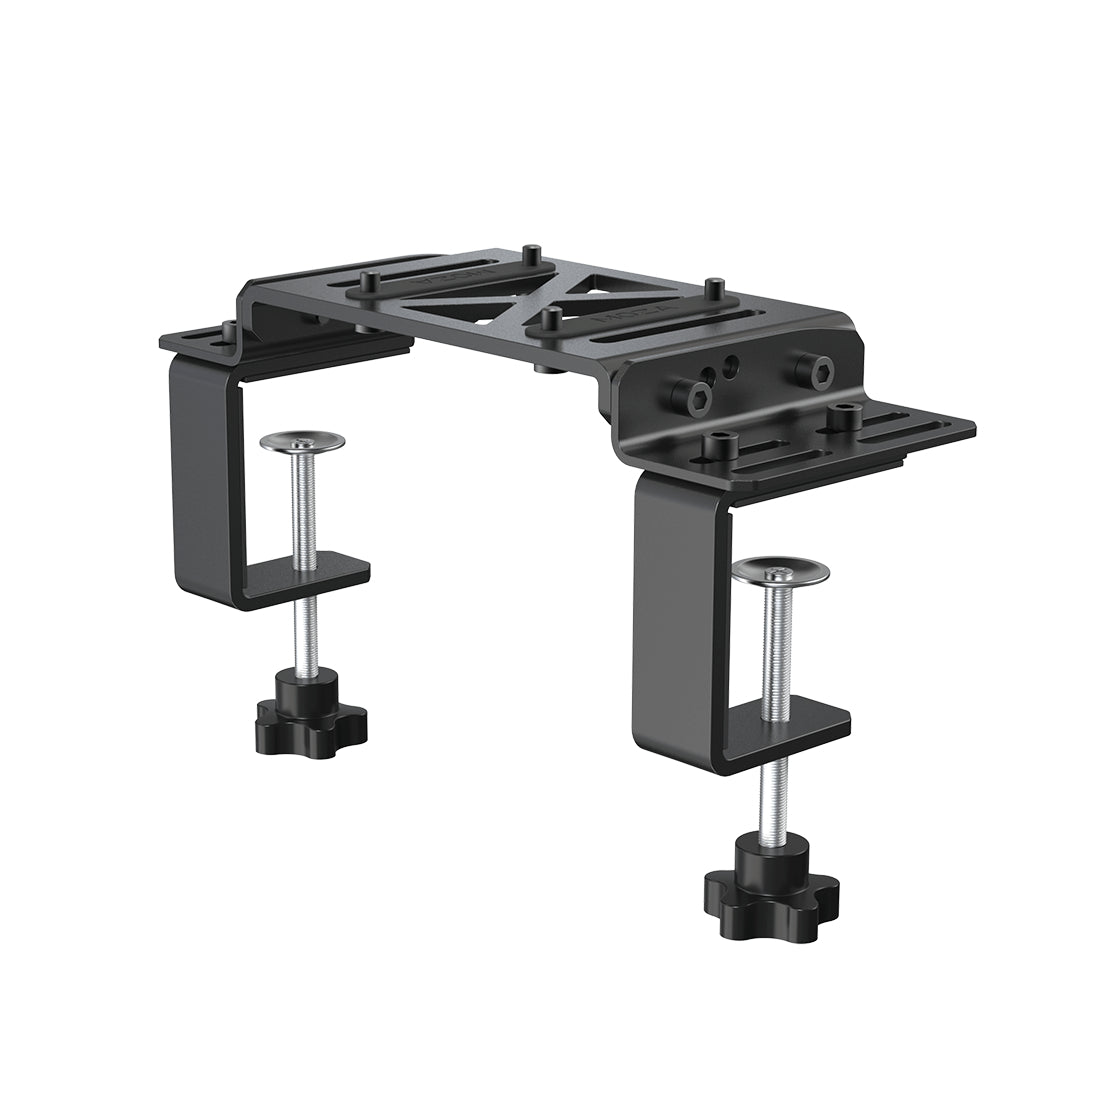 Moza Racing R9 Table Clamp - محاكي - Store 974 | ستور ٩٧٤